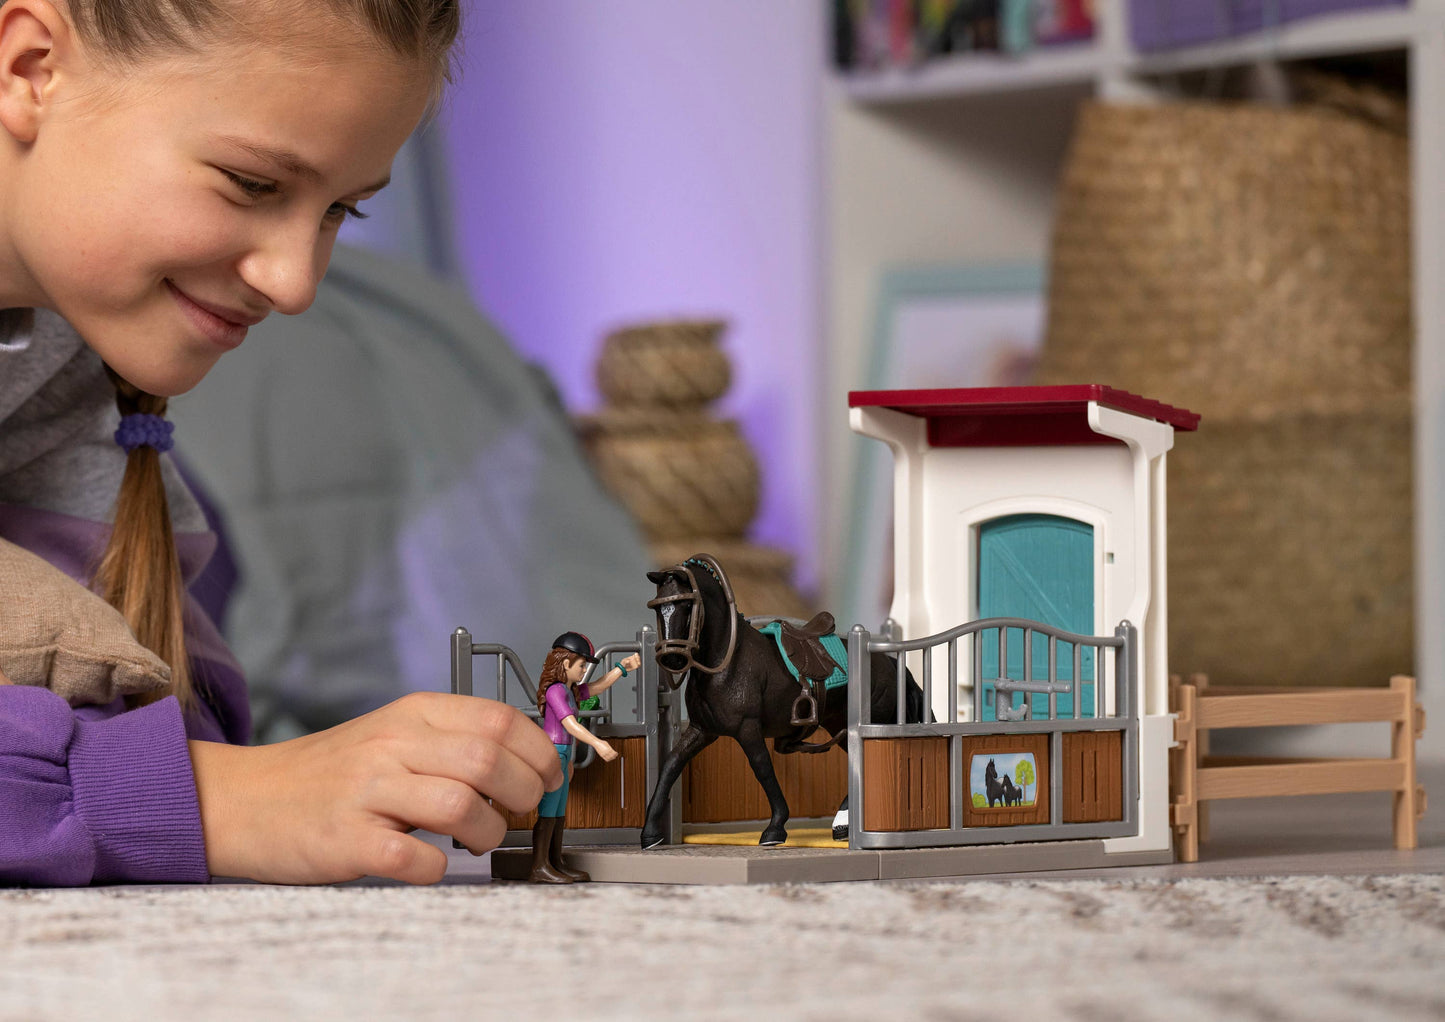 Horse box with Lisa & Storm Playset with Horse and Rider